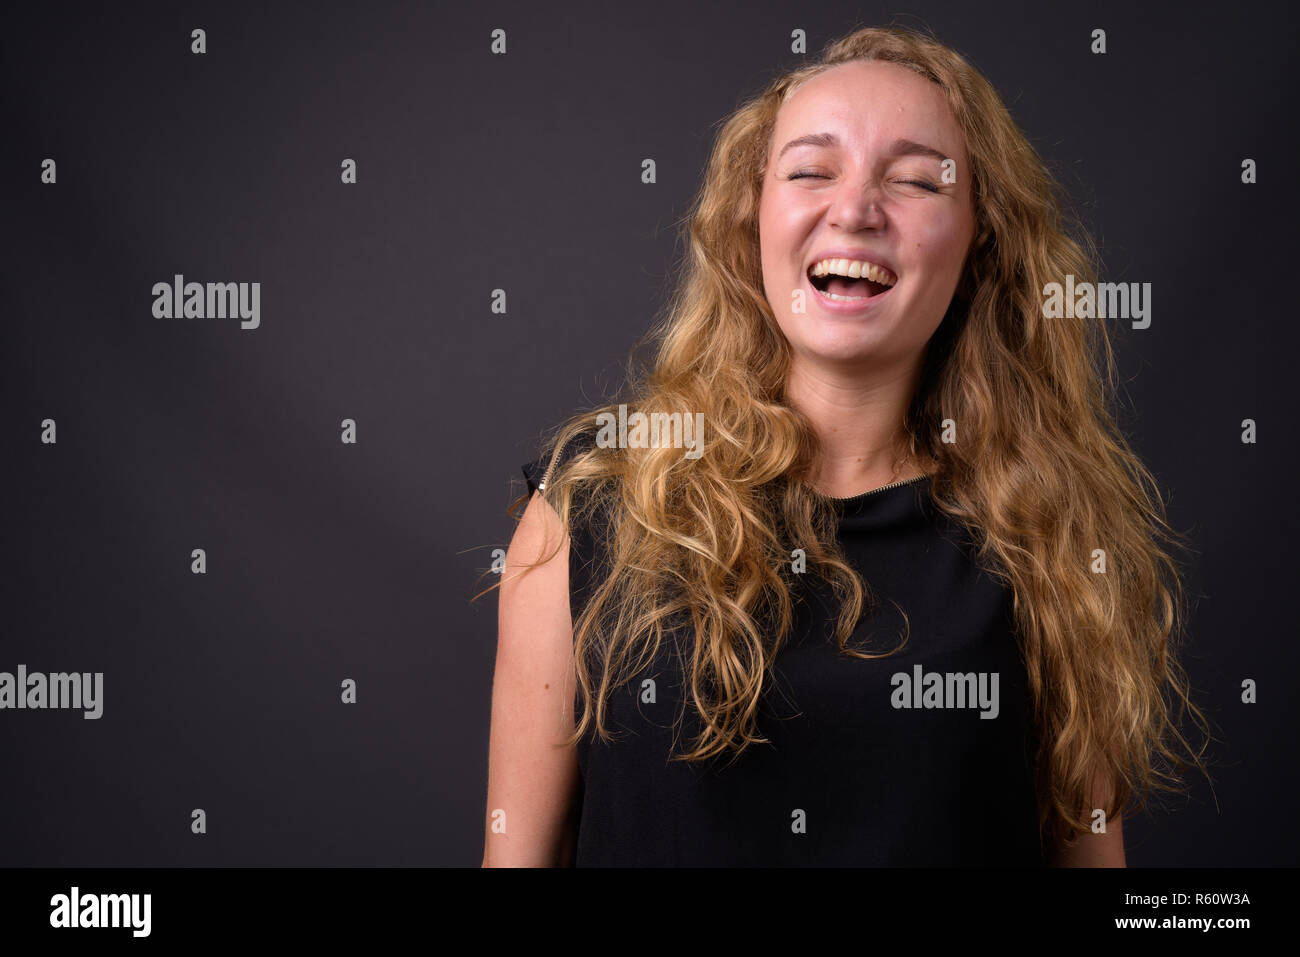 Young beautiful businesswoman with long wavy blond hair laughing Stock Photo